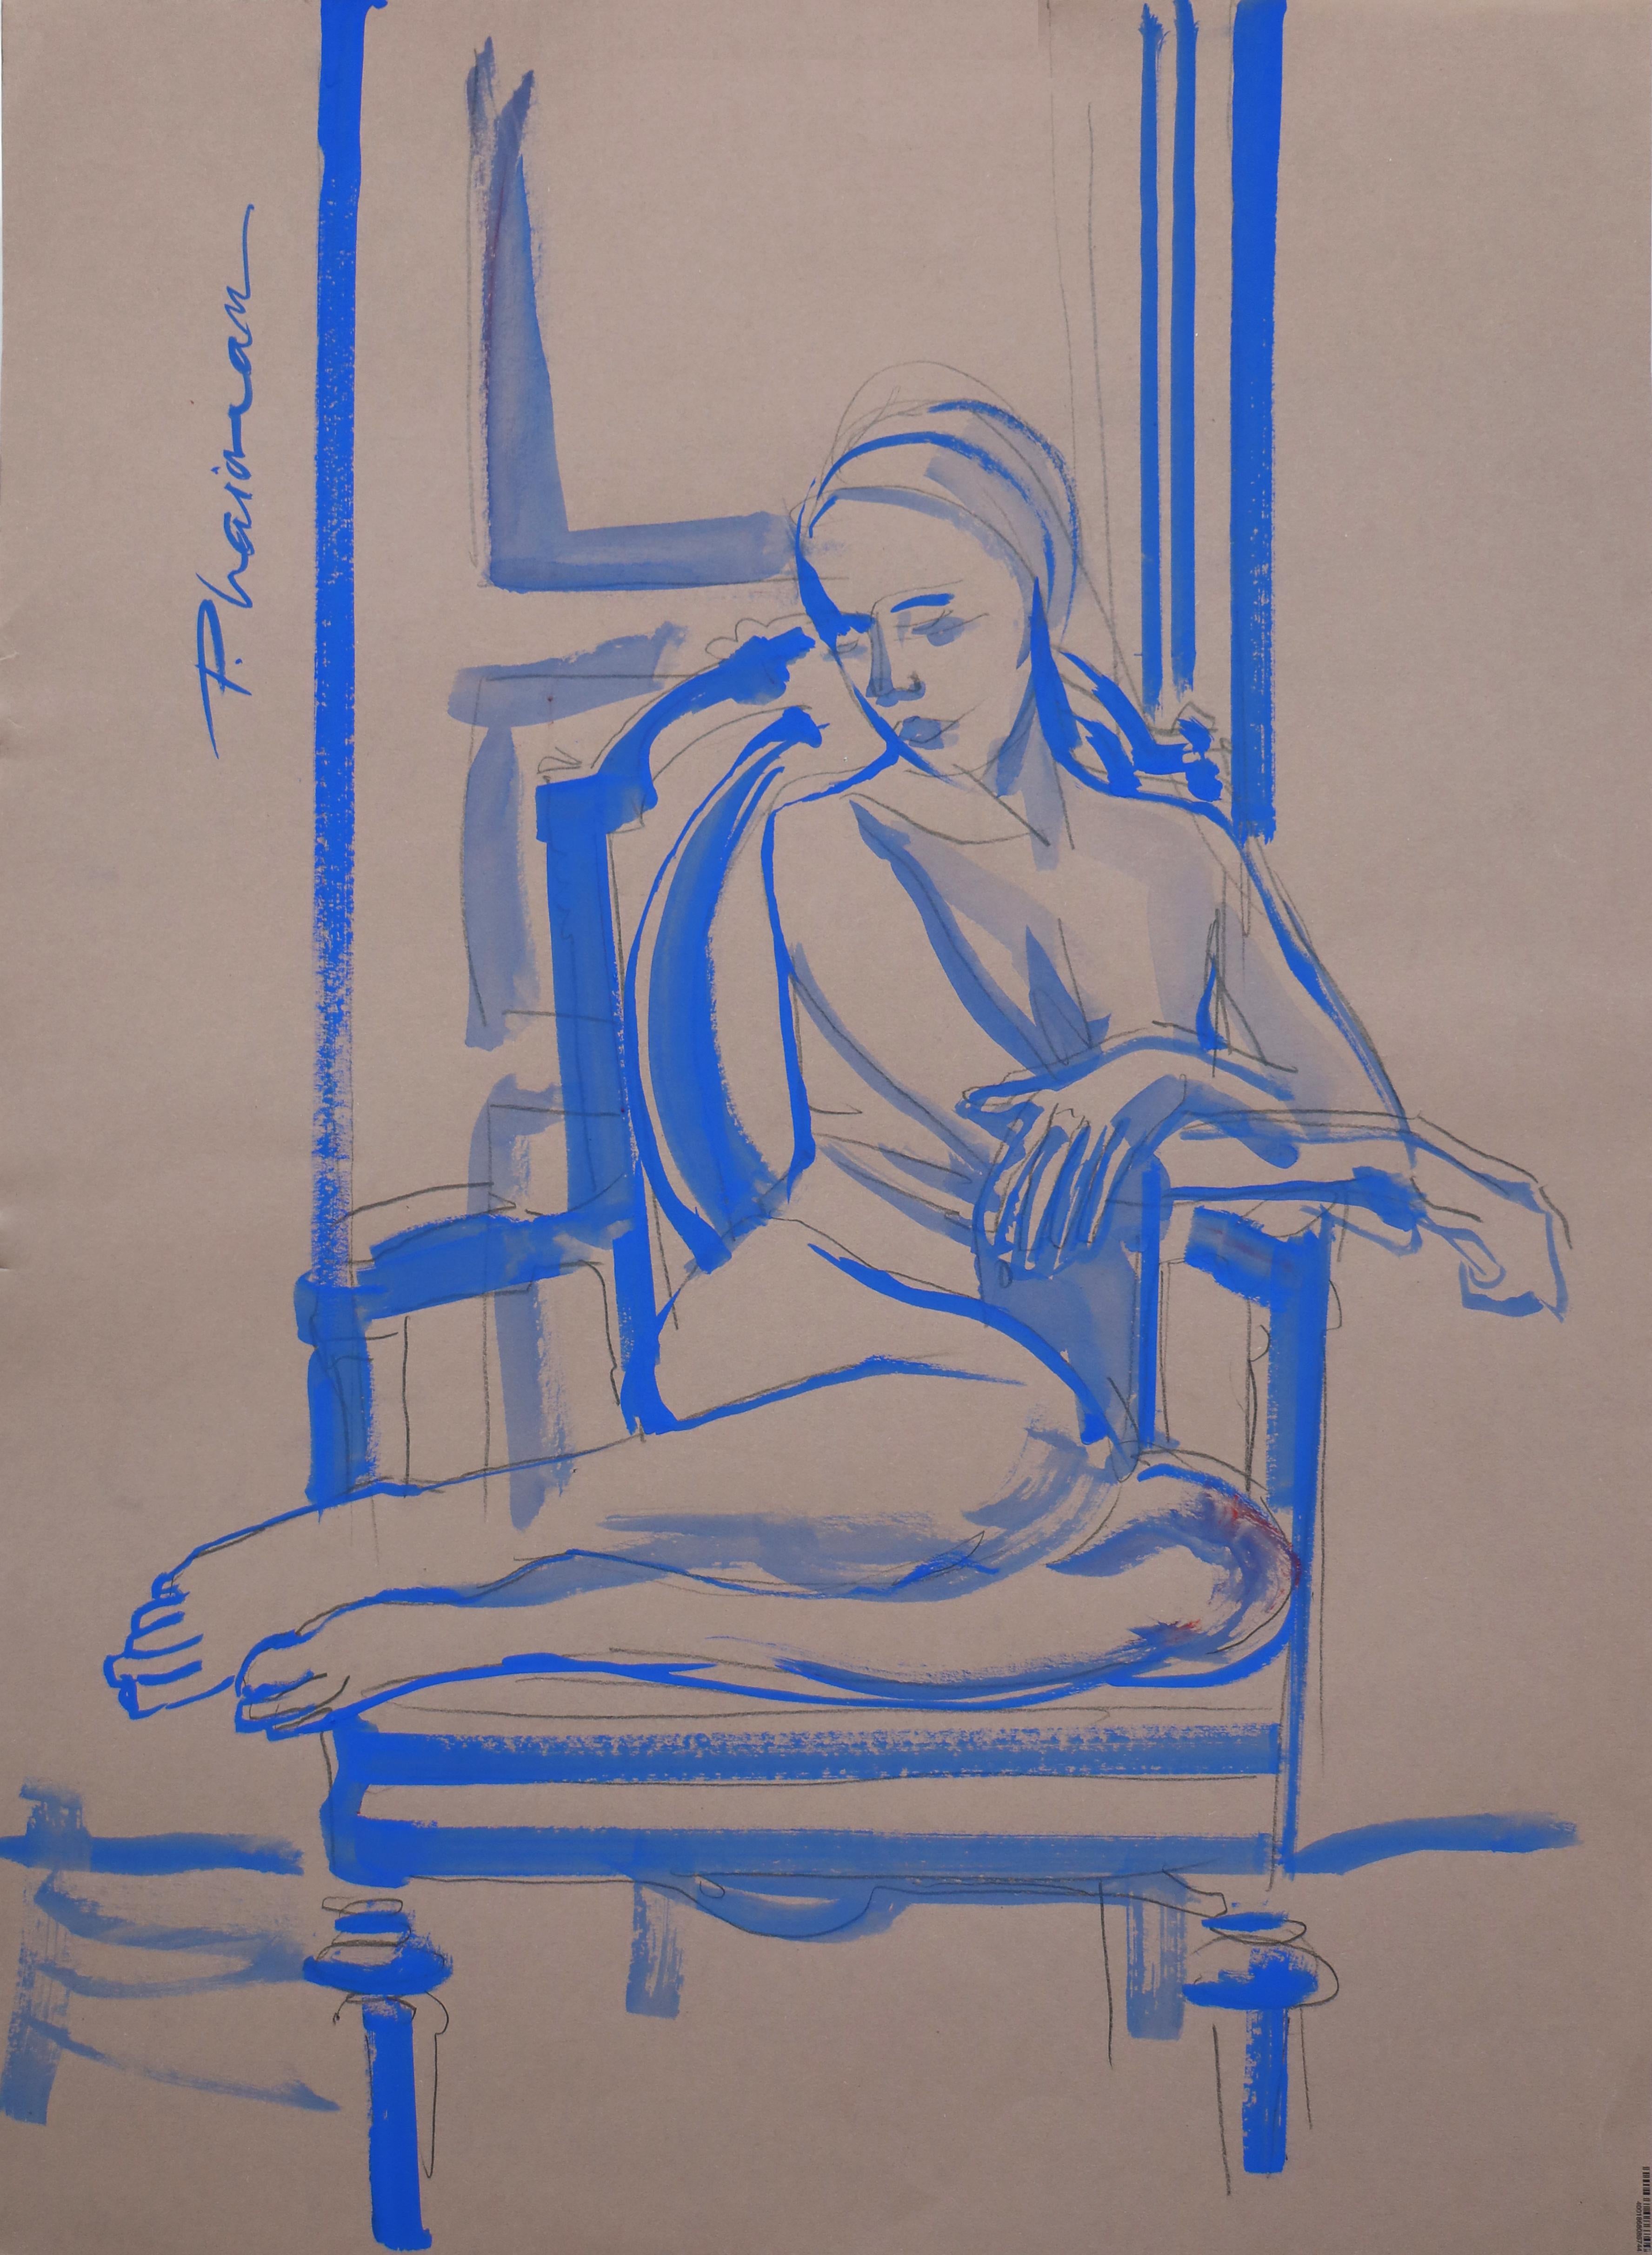 "Nude in Blue" 
Part of my Nude in Interior series.
Female nude, ultramarine blue tempera on blue gray paper, inspired by Matisse.
70x50cm / 27.5x19.5in
Shipped rolled in a tube from Florida, US, well packed.
